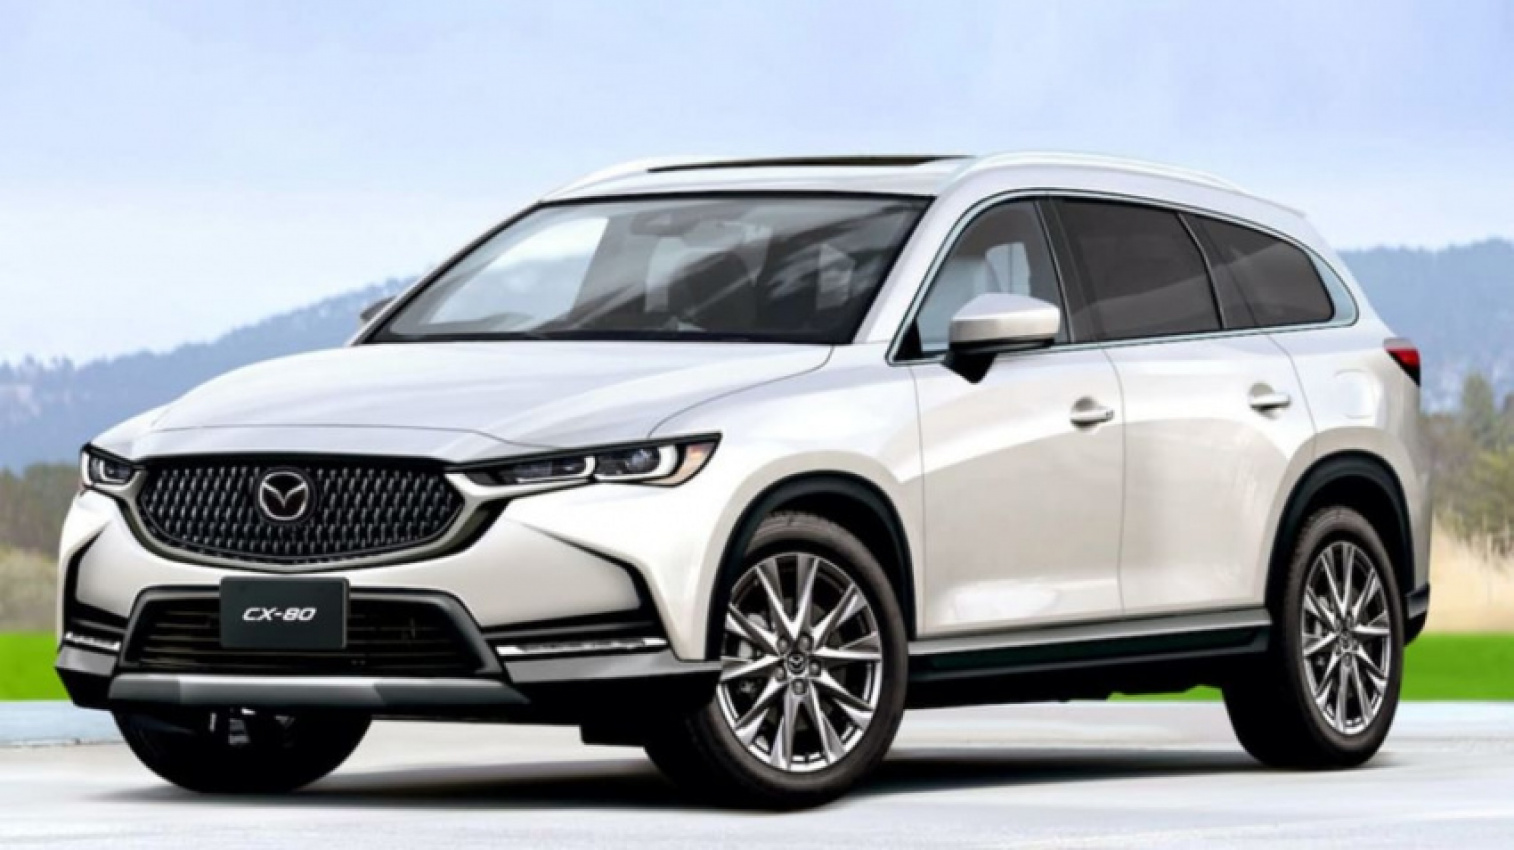 autos, cars, ford, mazda, toyota, ford everest, mazda cx-8, toyota kluger, mazda goes even bigger on suvs: would this mazda cx-80 tempt you from your toyota kluger or ford everest - or even your cx-9?